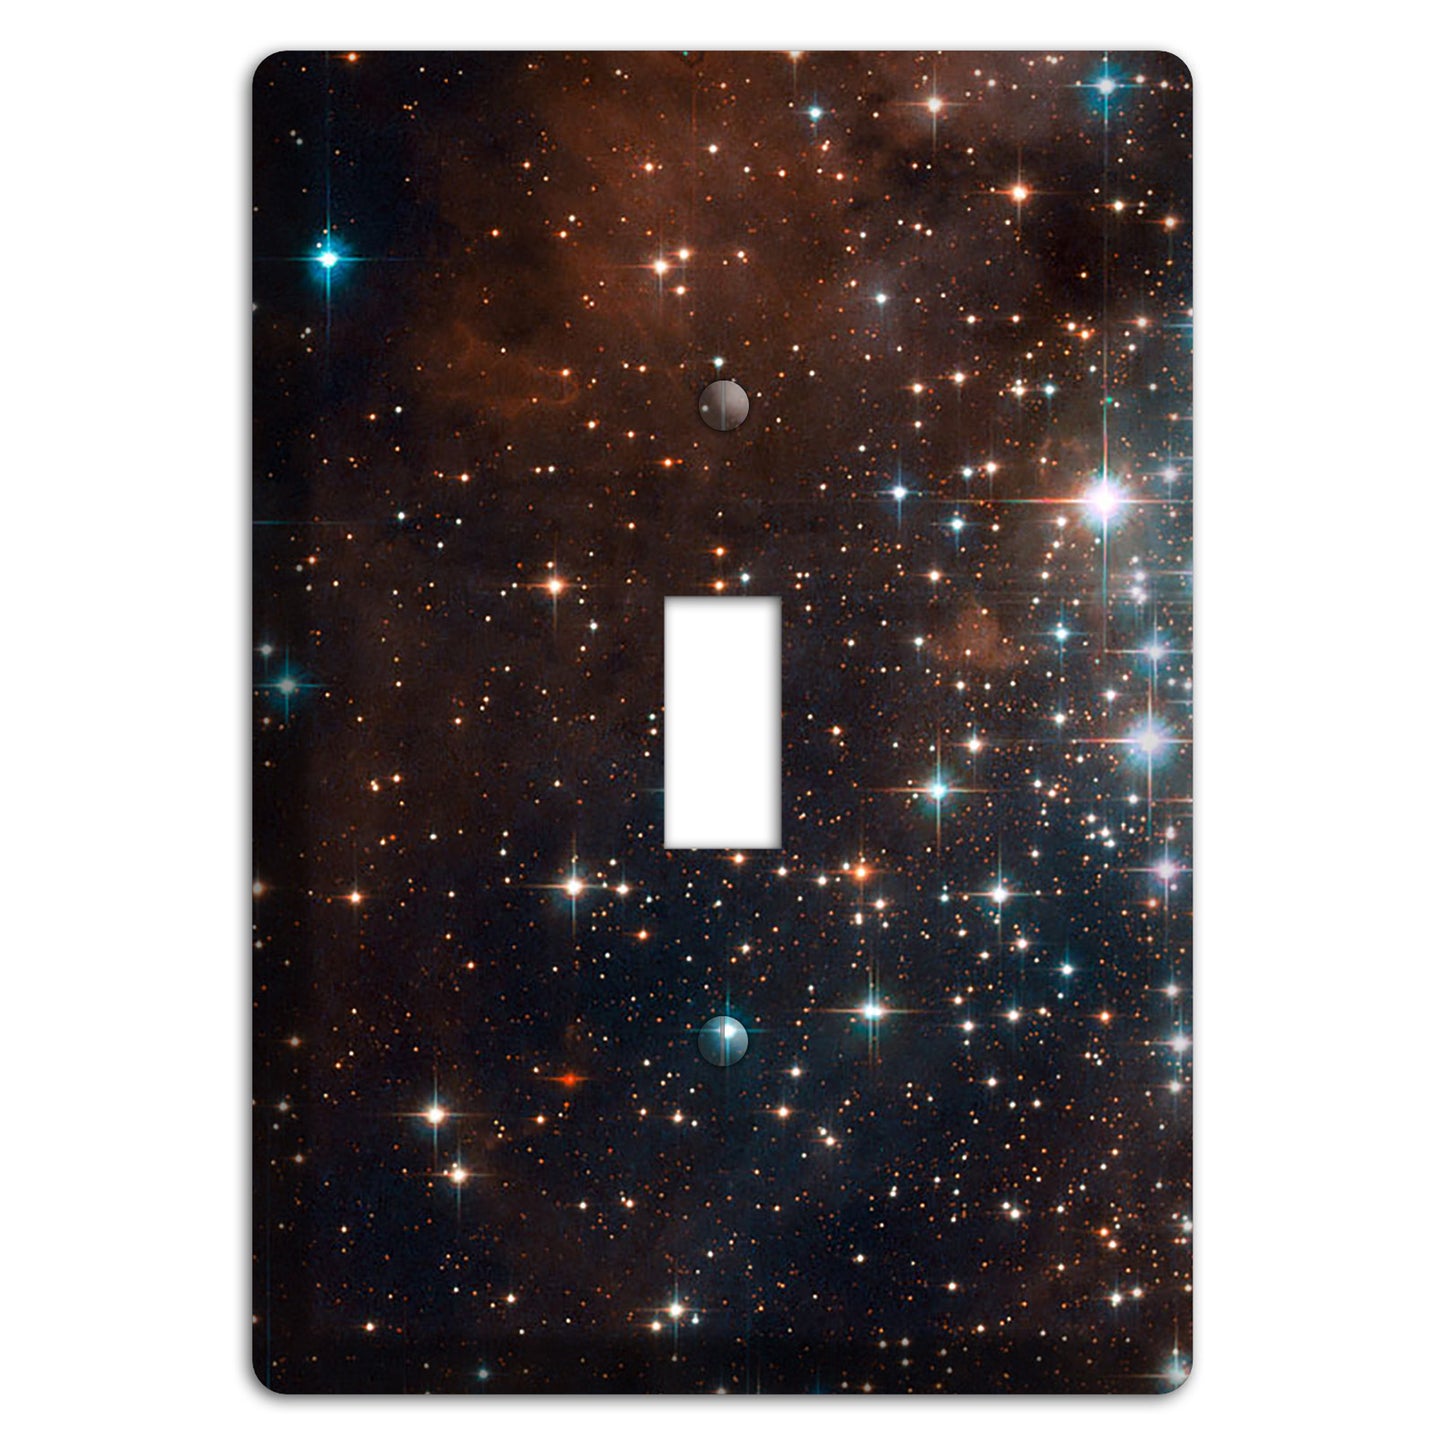 star cluster bursts Cover Plates